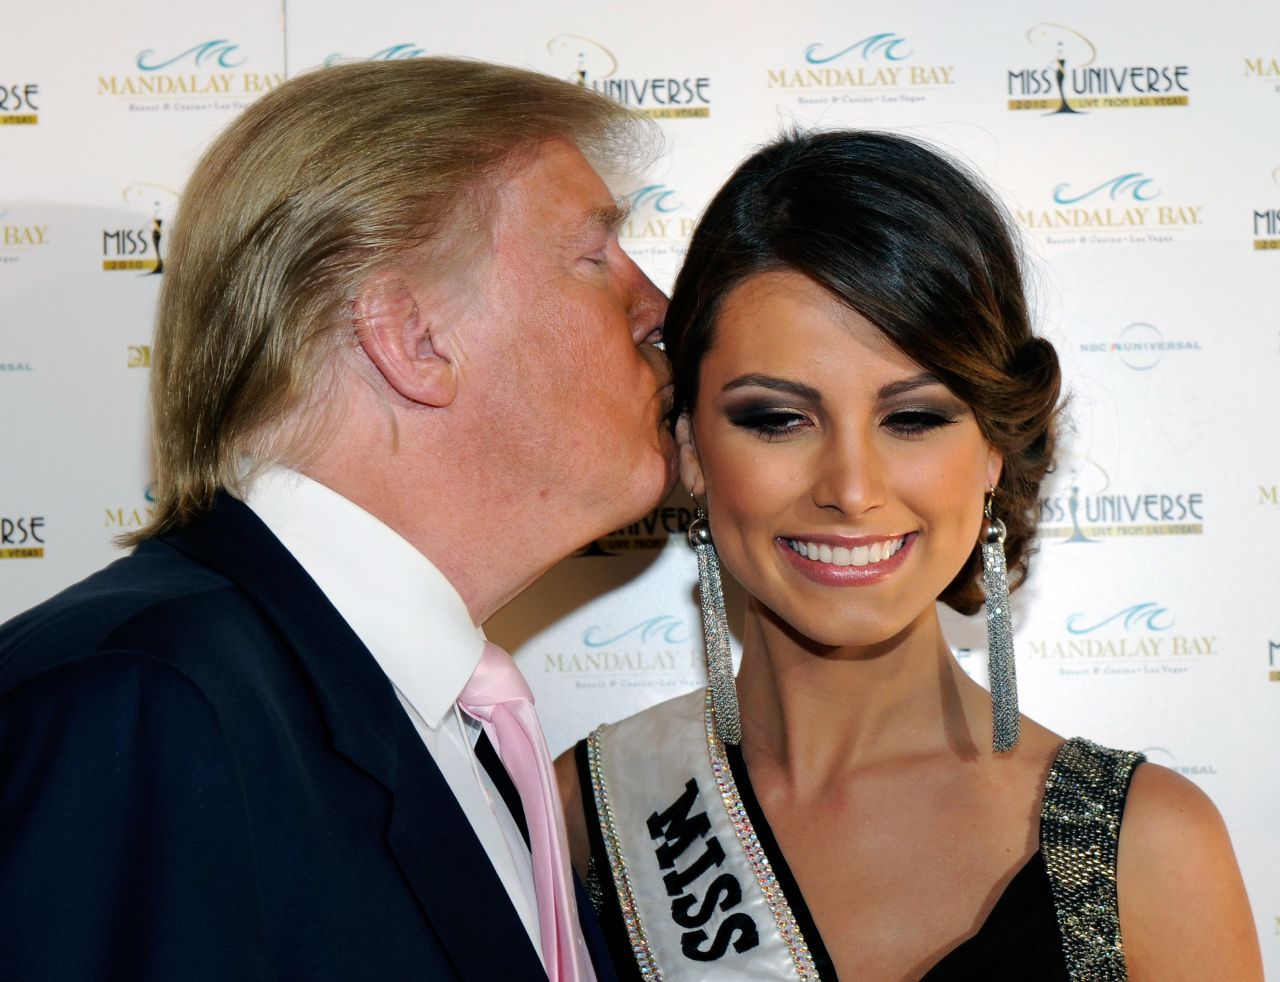 Trump kisses Miss Universe 2009 Stefania Fernandez as they arrive at the 2010 Miss Universe Pageant at the Mandalay Bay Events Center on August 23, 2010, in Las Vegas.